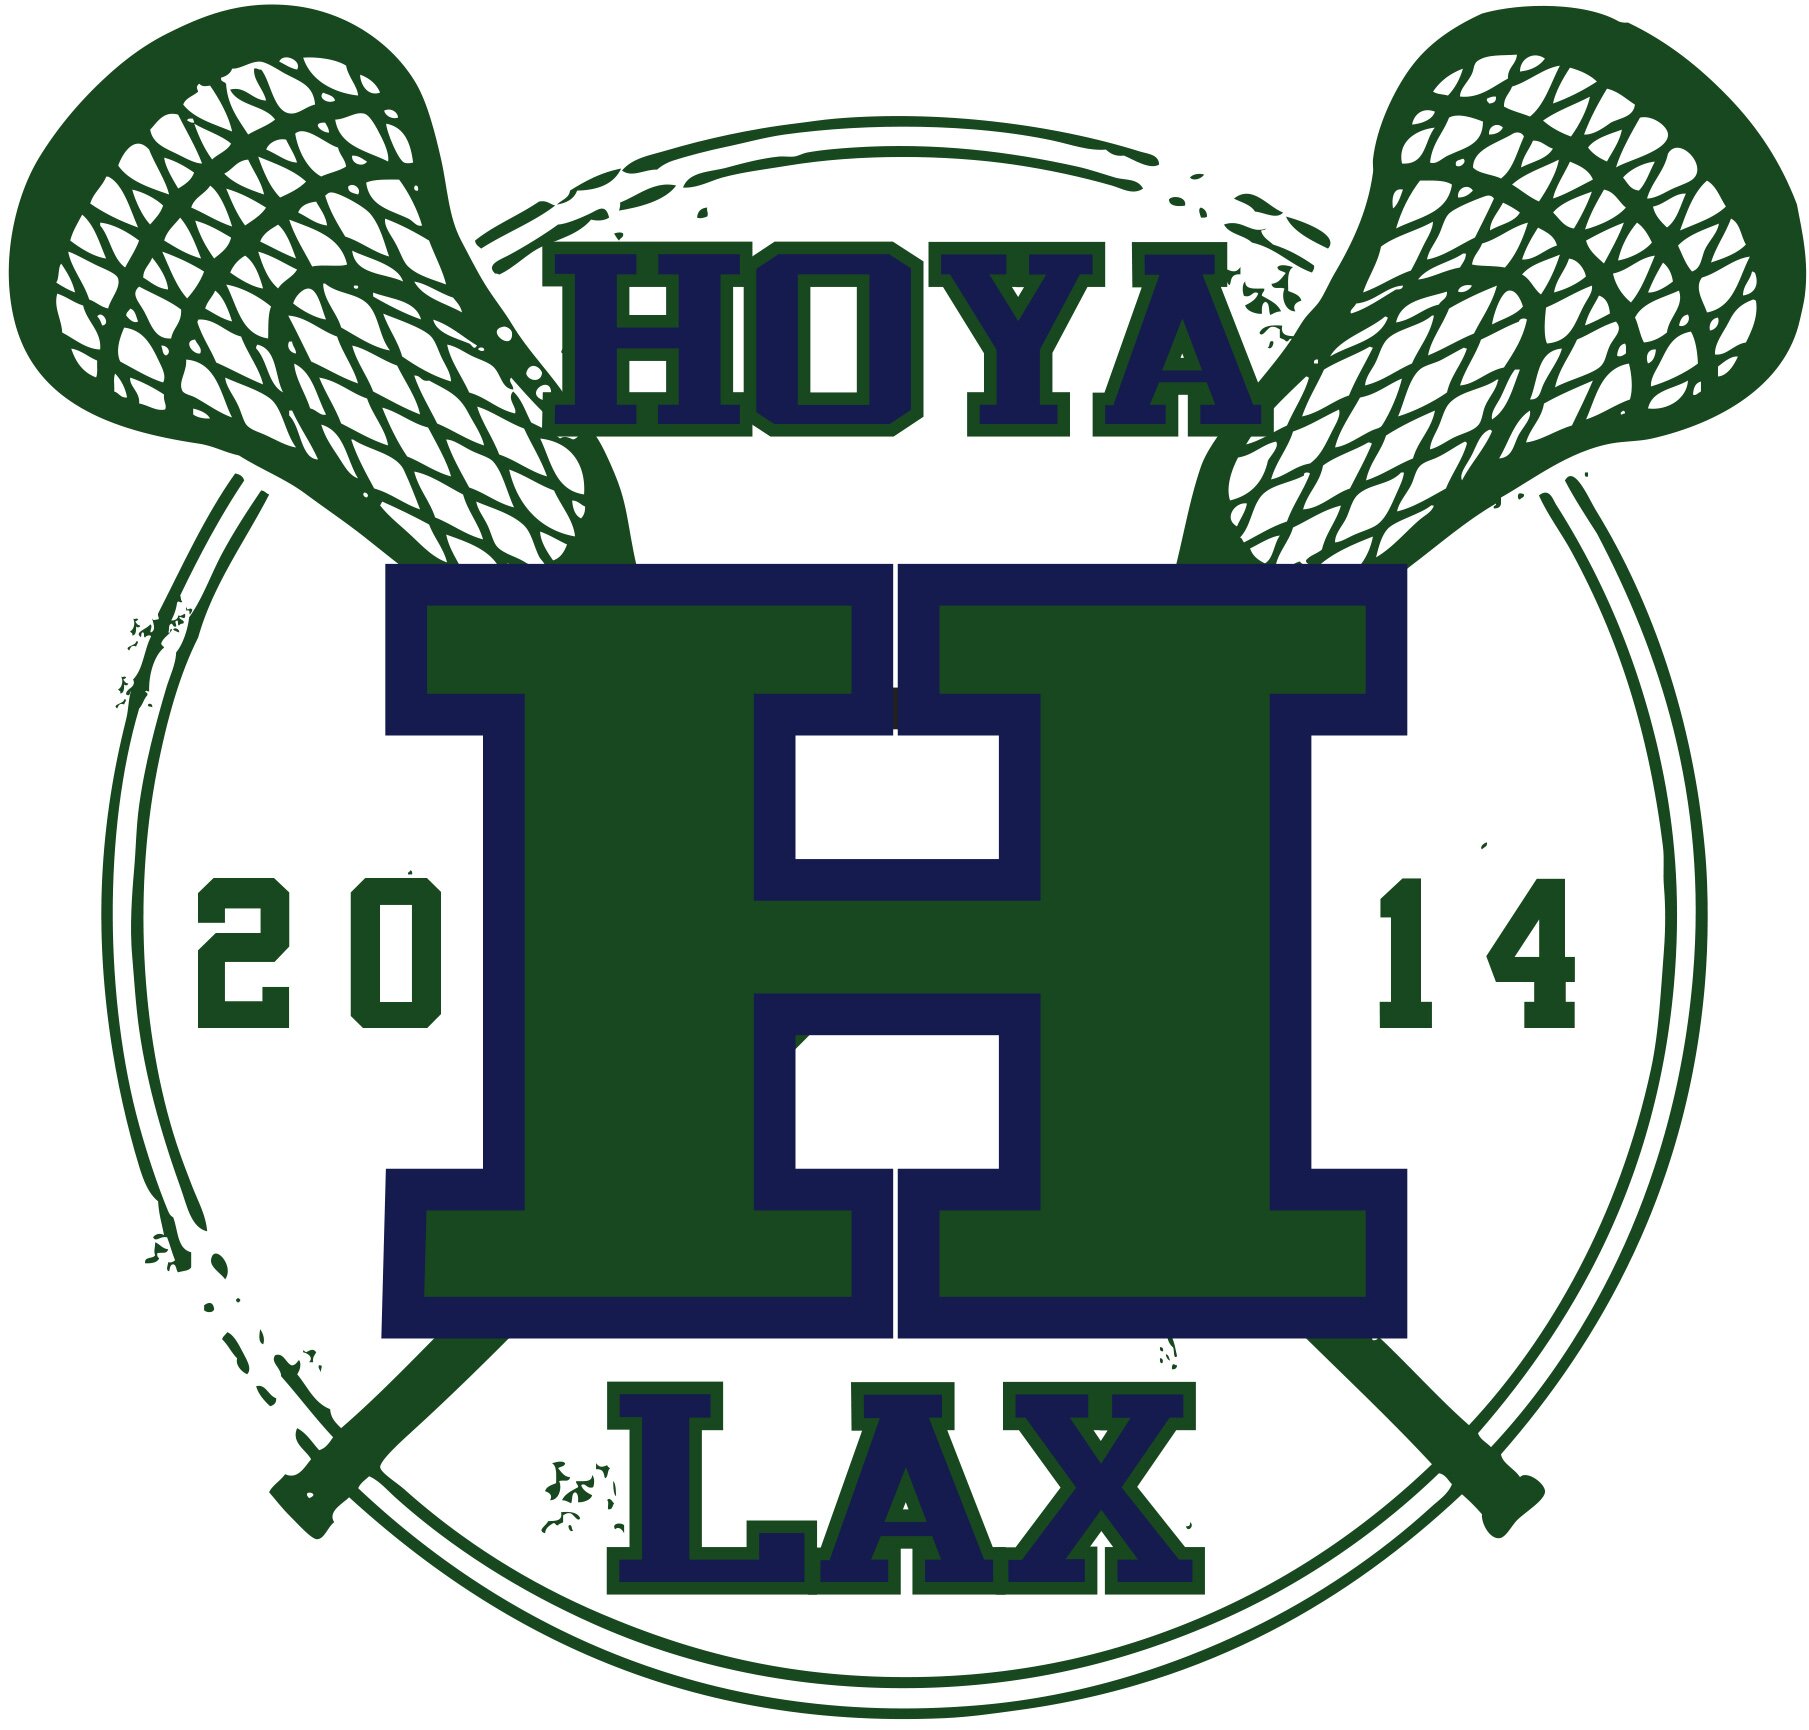 The Harrison High School Lacrosse program has over 160 men and women players, from middle school through High School varsity. Grow the program, love the game.